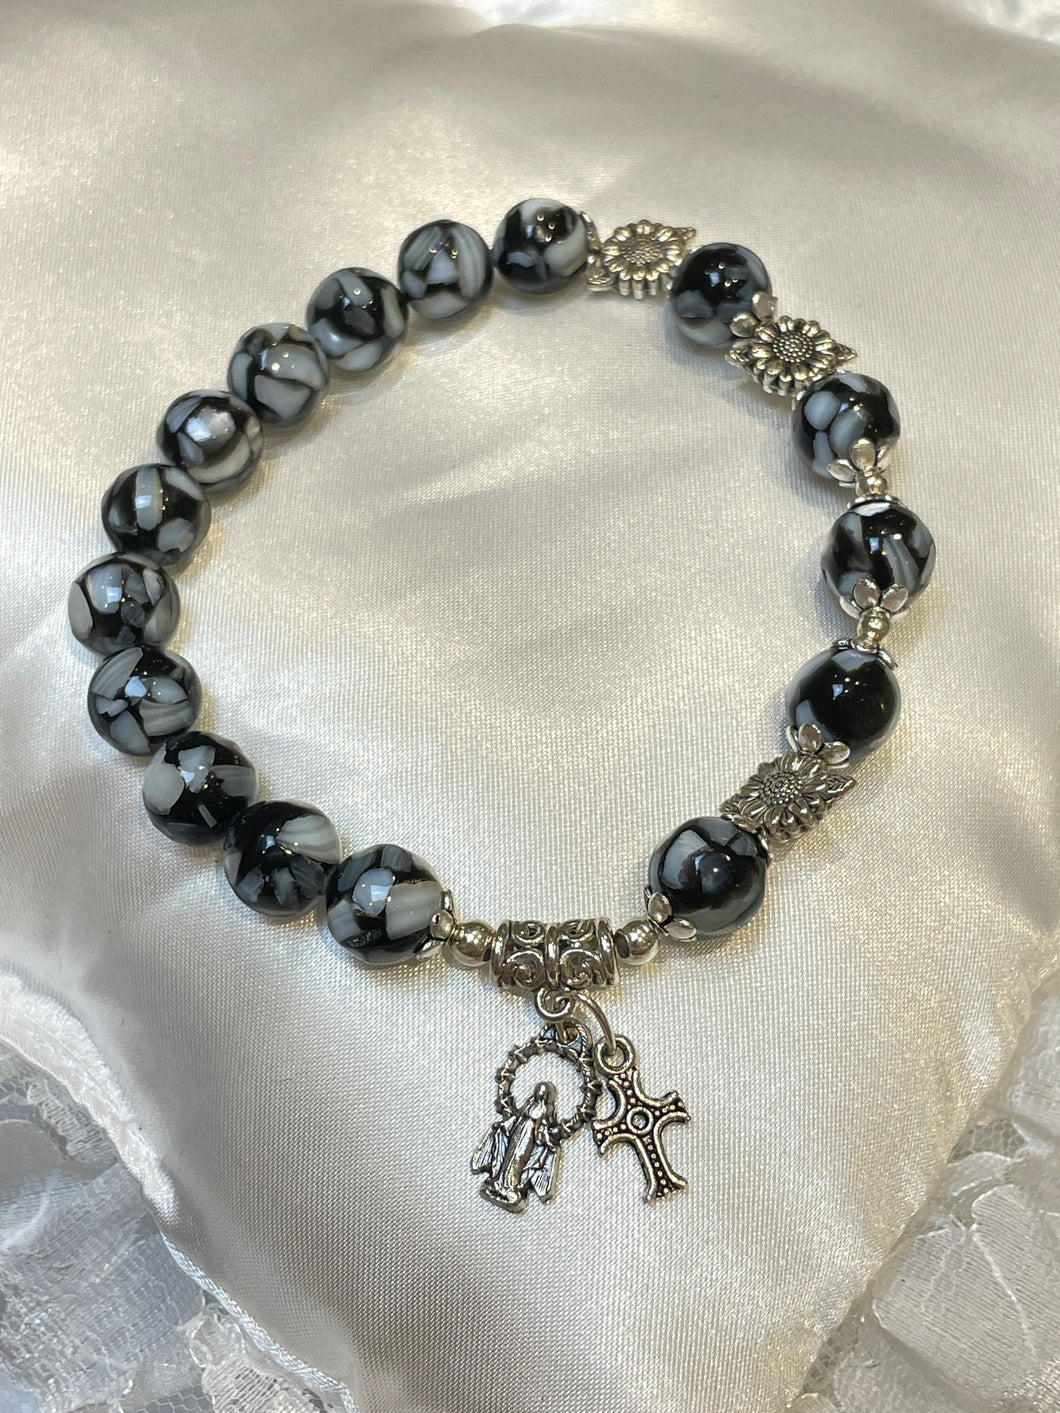 Black/White Gemstone Rosary Bracelet with Our Lady of Grace and Cross Charms